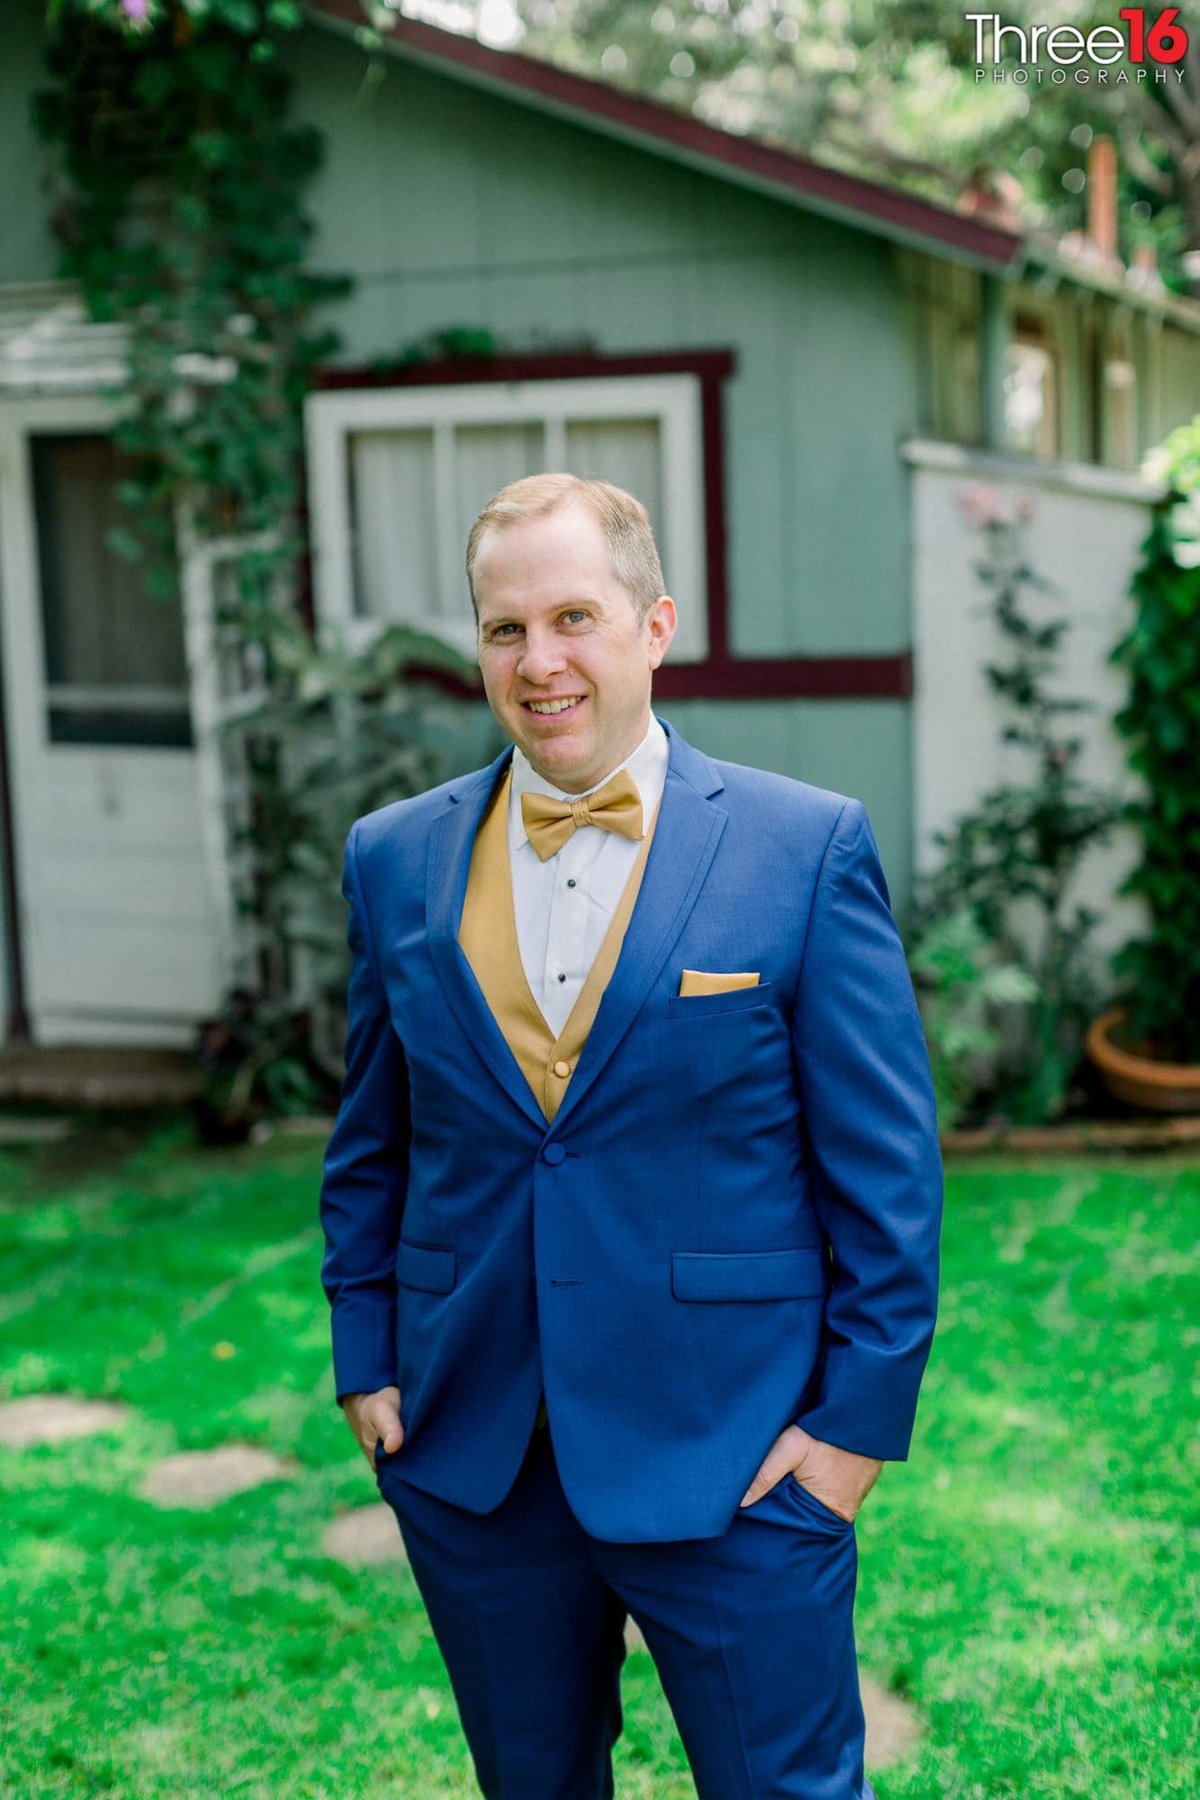 Groom poses for the wedding photographer with blue suit and yellow vest